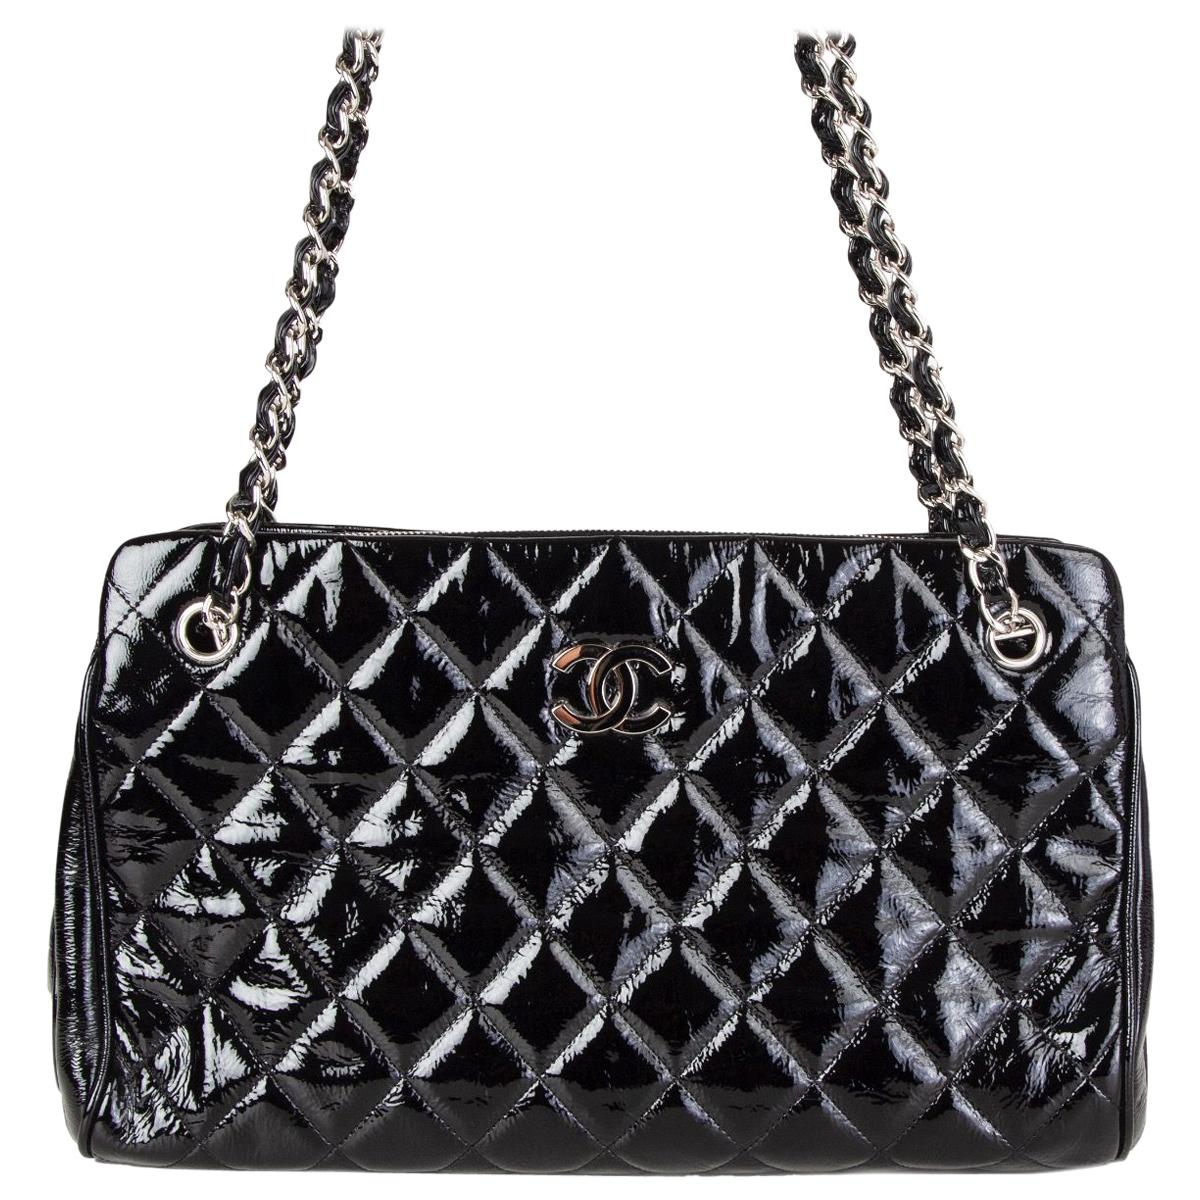 CHANEL black quilted patent leather CC ANGLE TOTE Shoulder Bag